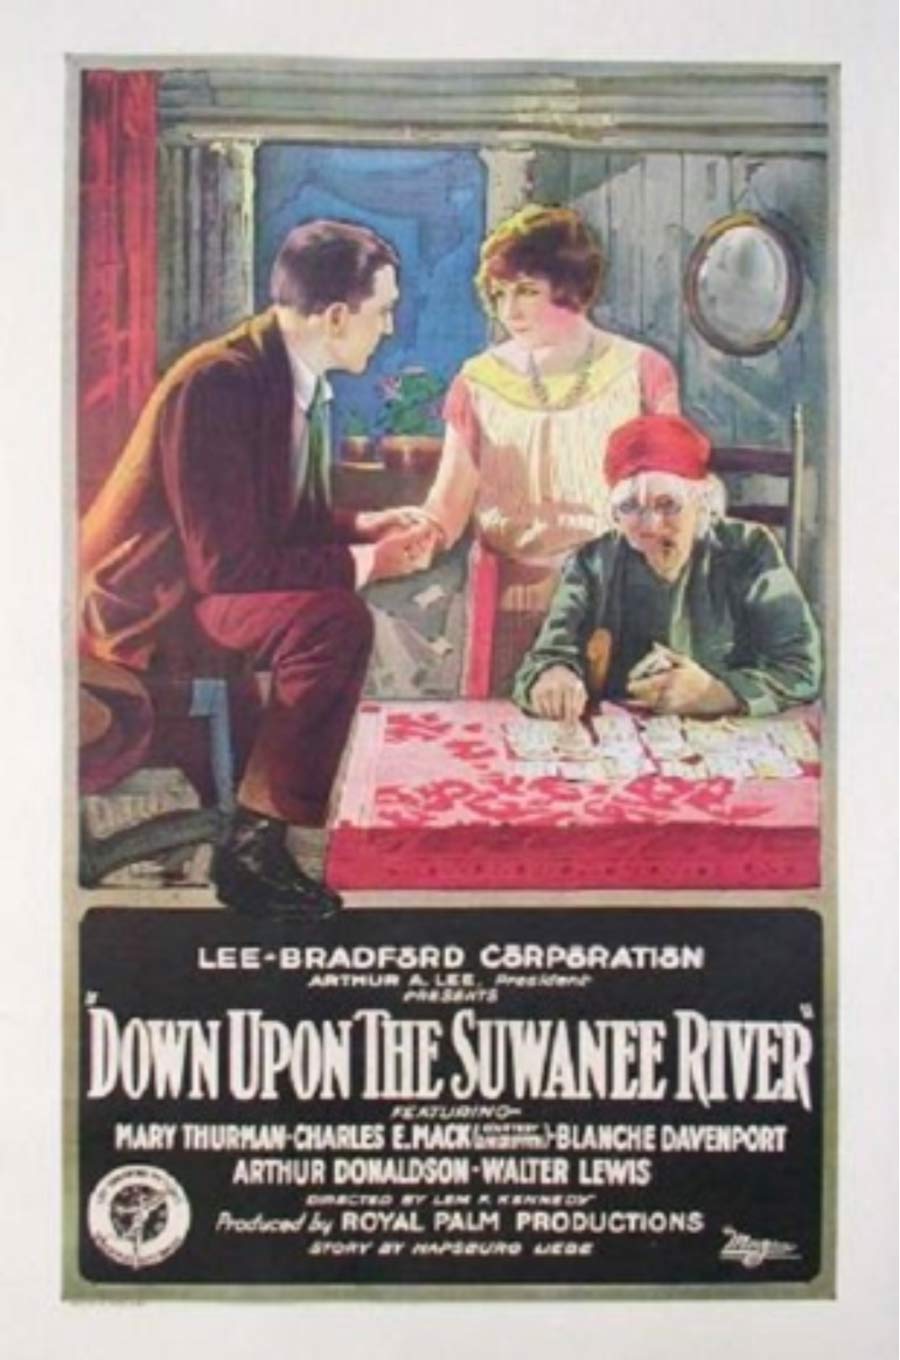 Poster of Down Upon the Suwanee River, released in 1925.